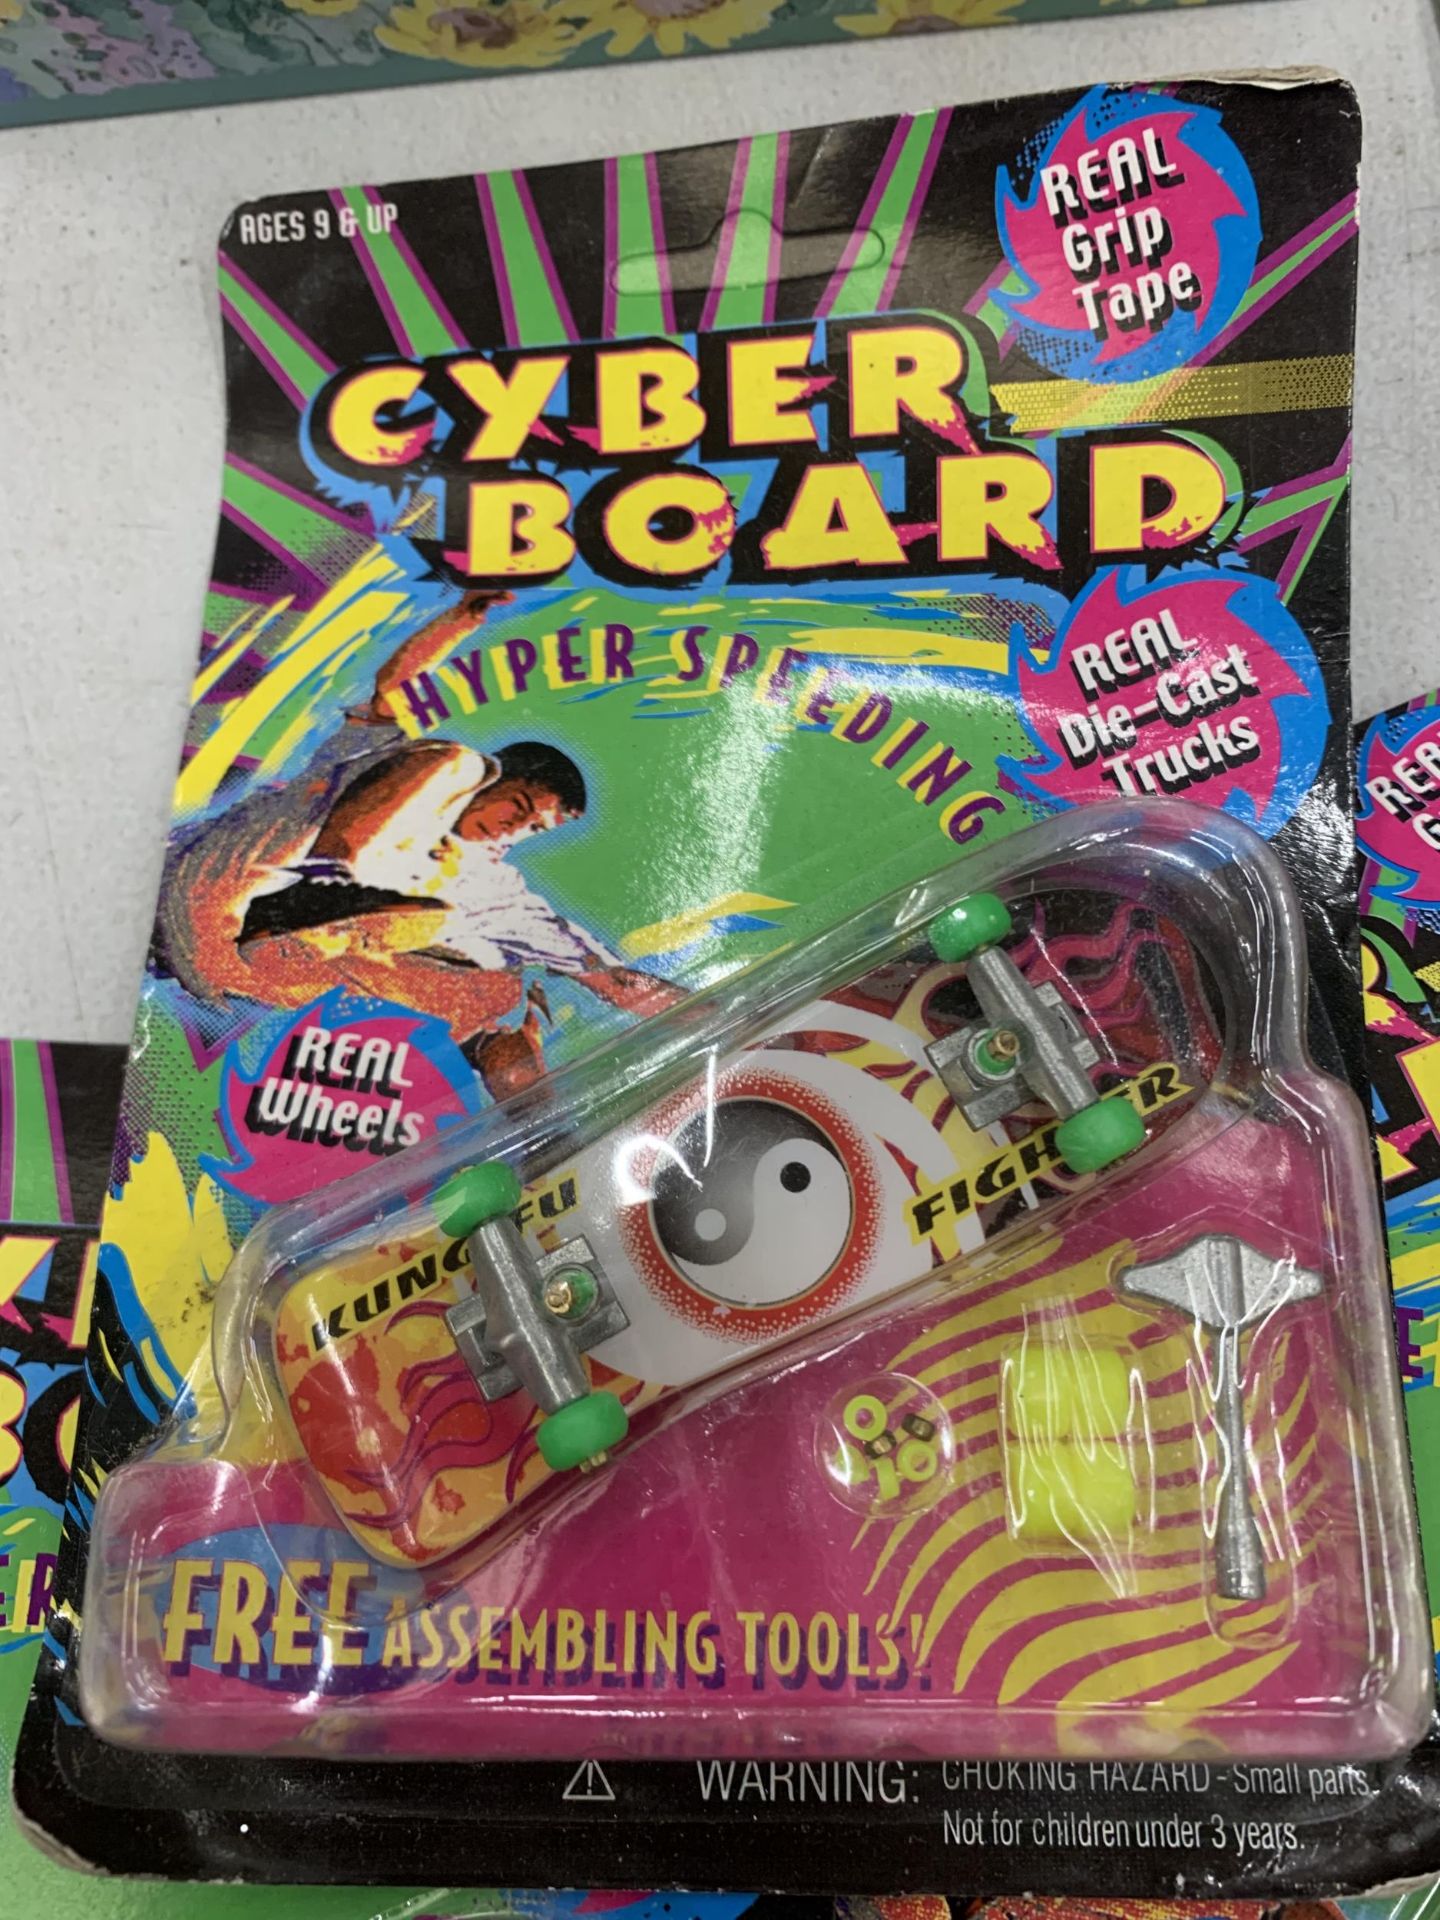 A QUANTITY OF CYBER BOARD HYPER SPEEDING SKATEBOARDS - 9 IN TOTAL - Image 2 of 4